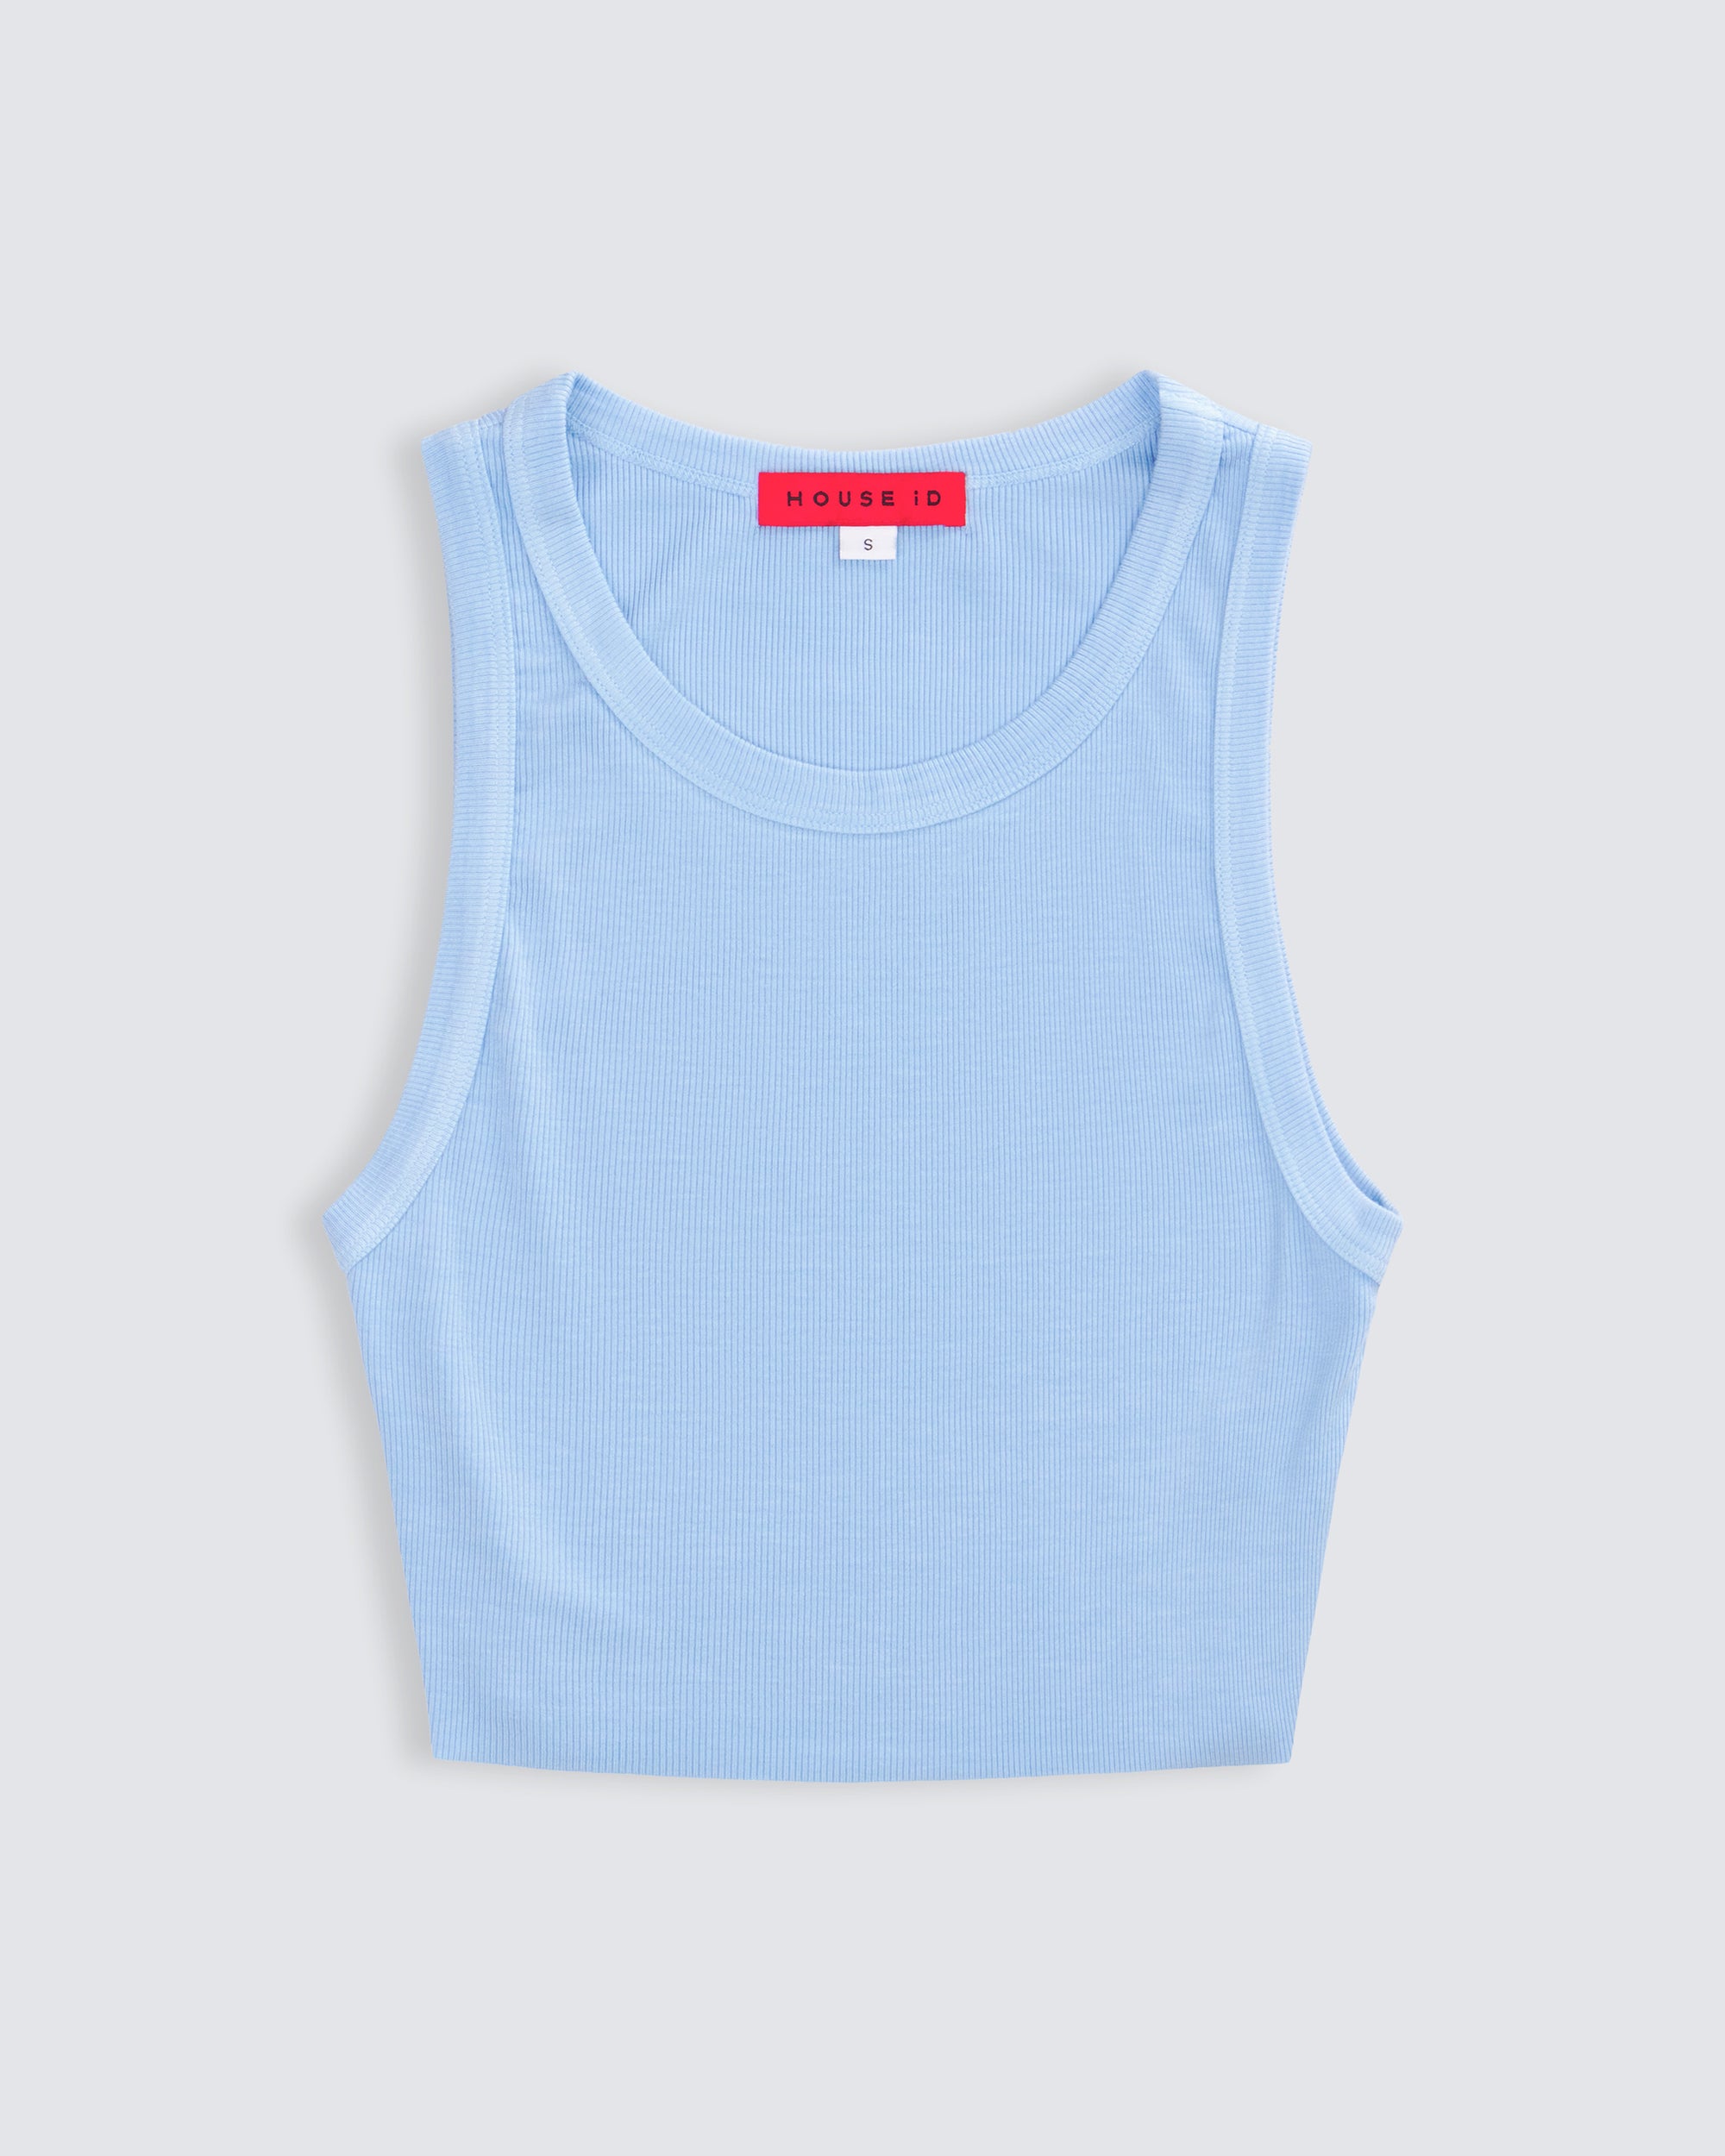 Womens cropped ribbed tank in sky blue